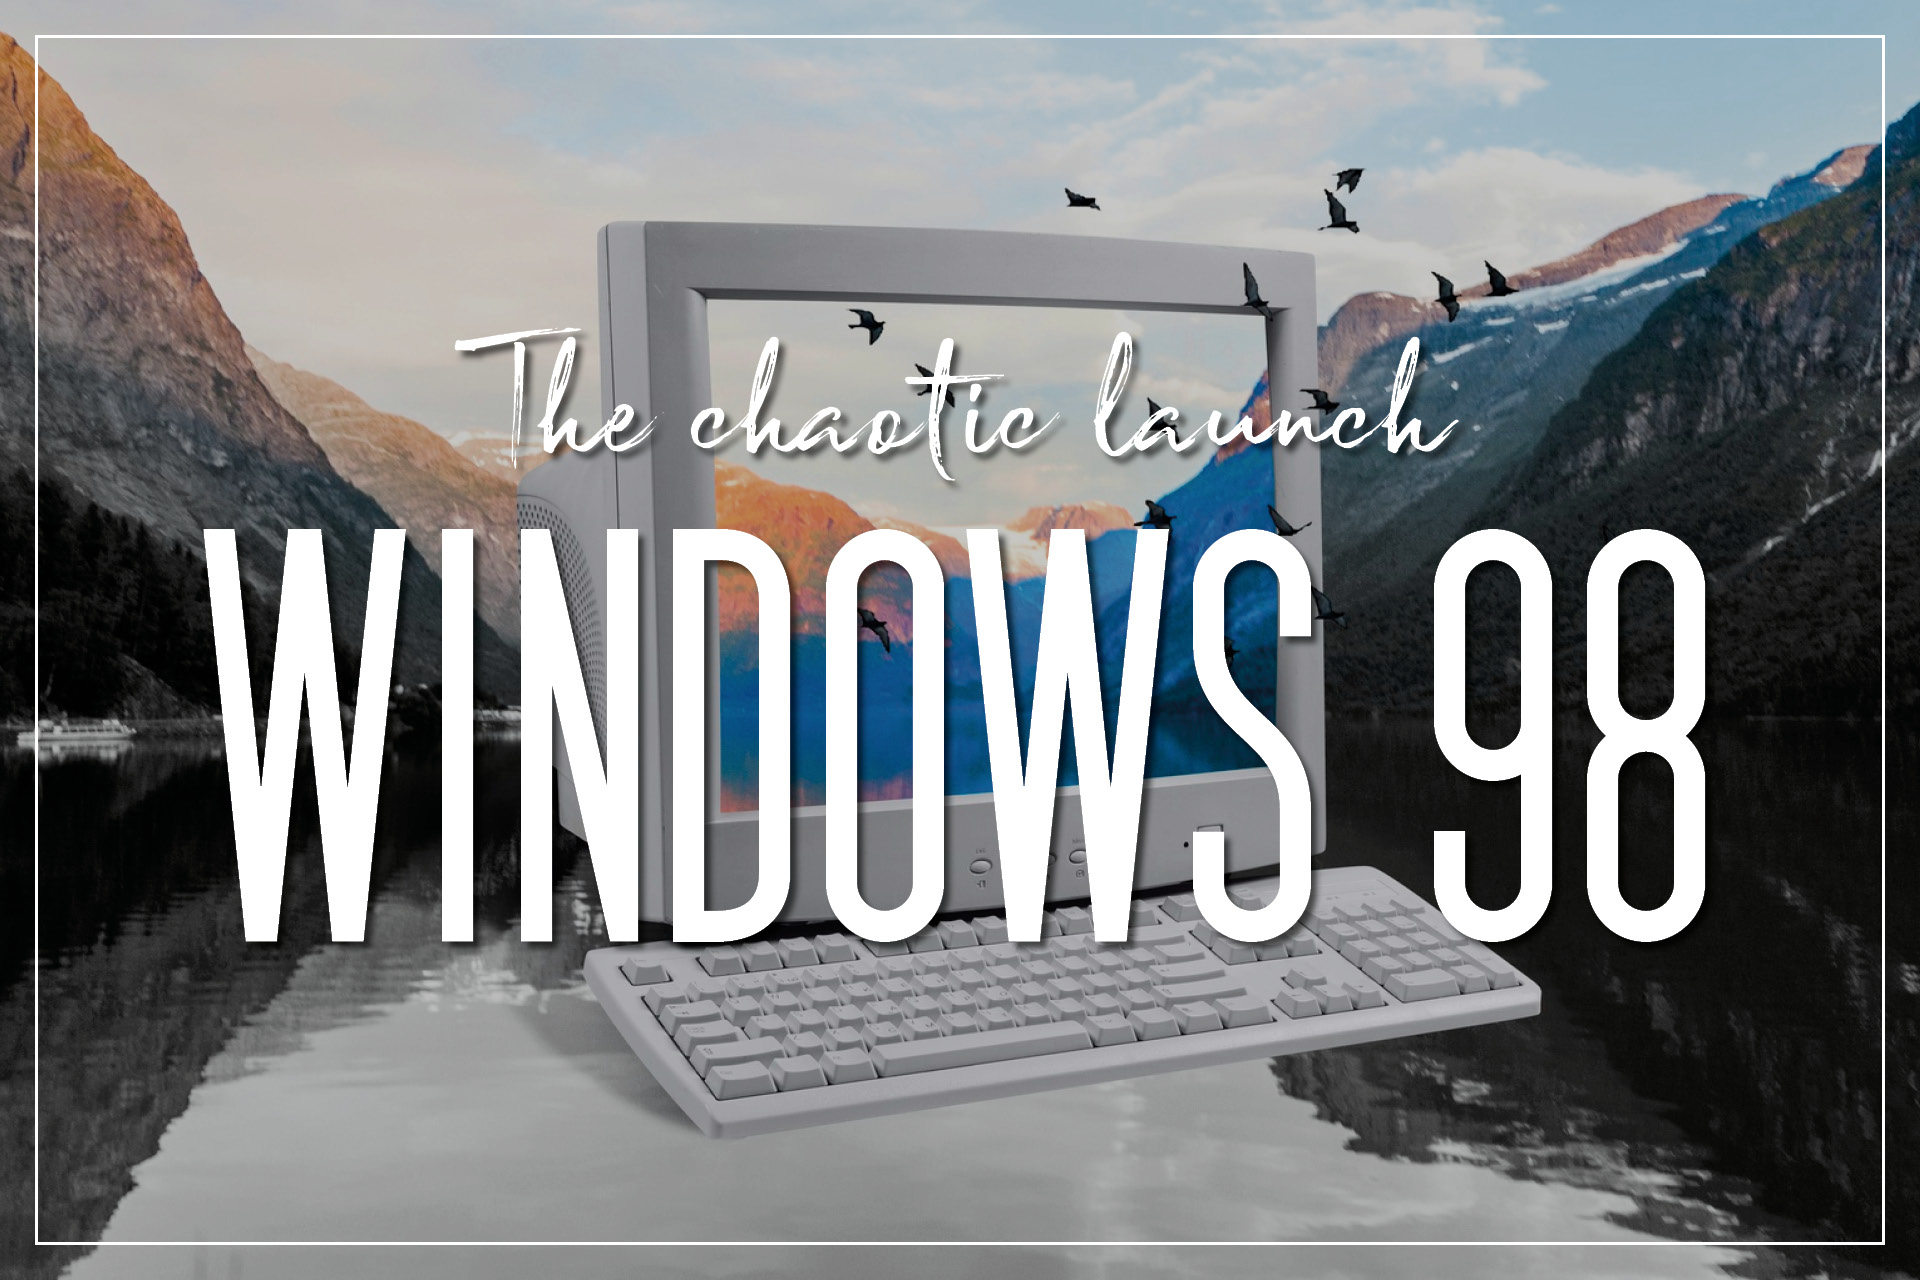 Windows 98: The Chaotic Launch that Gave Us More Laughs Than Functionality!